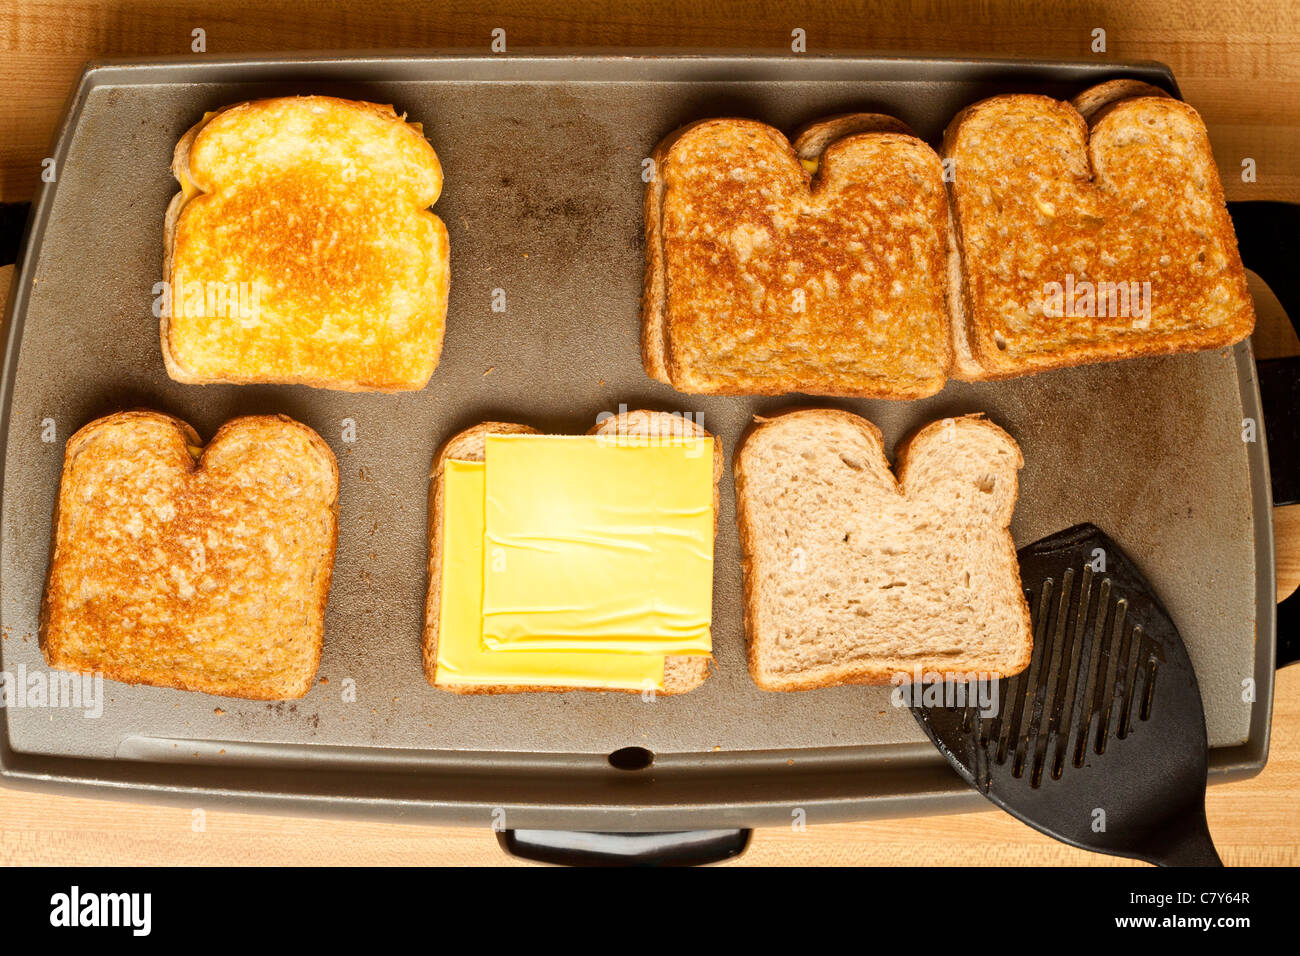 Five grilled cheese sandwiches cooking on a flat grill Stock Photo